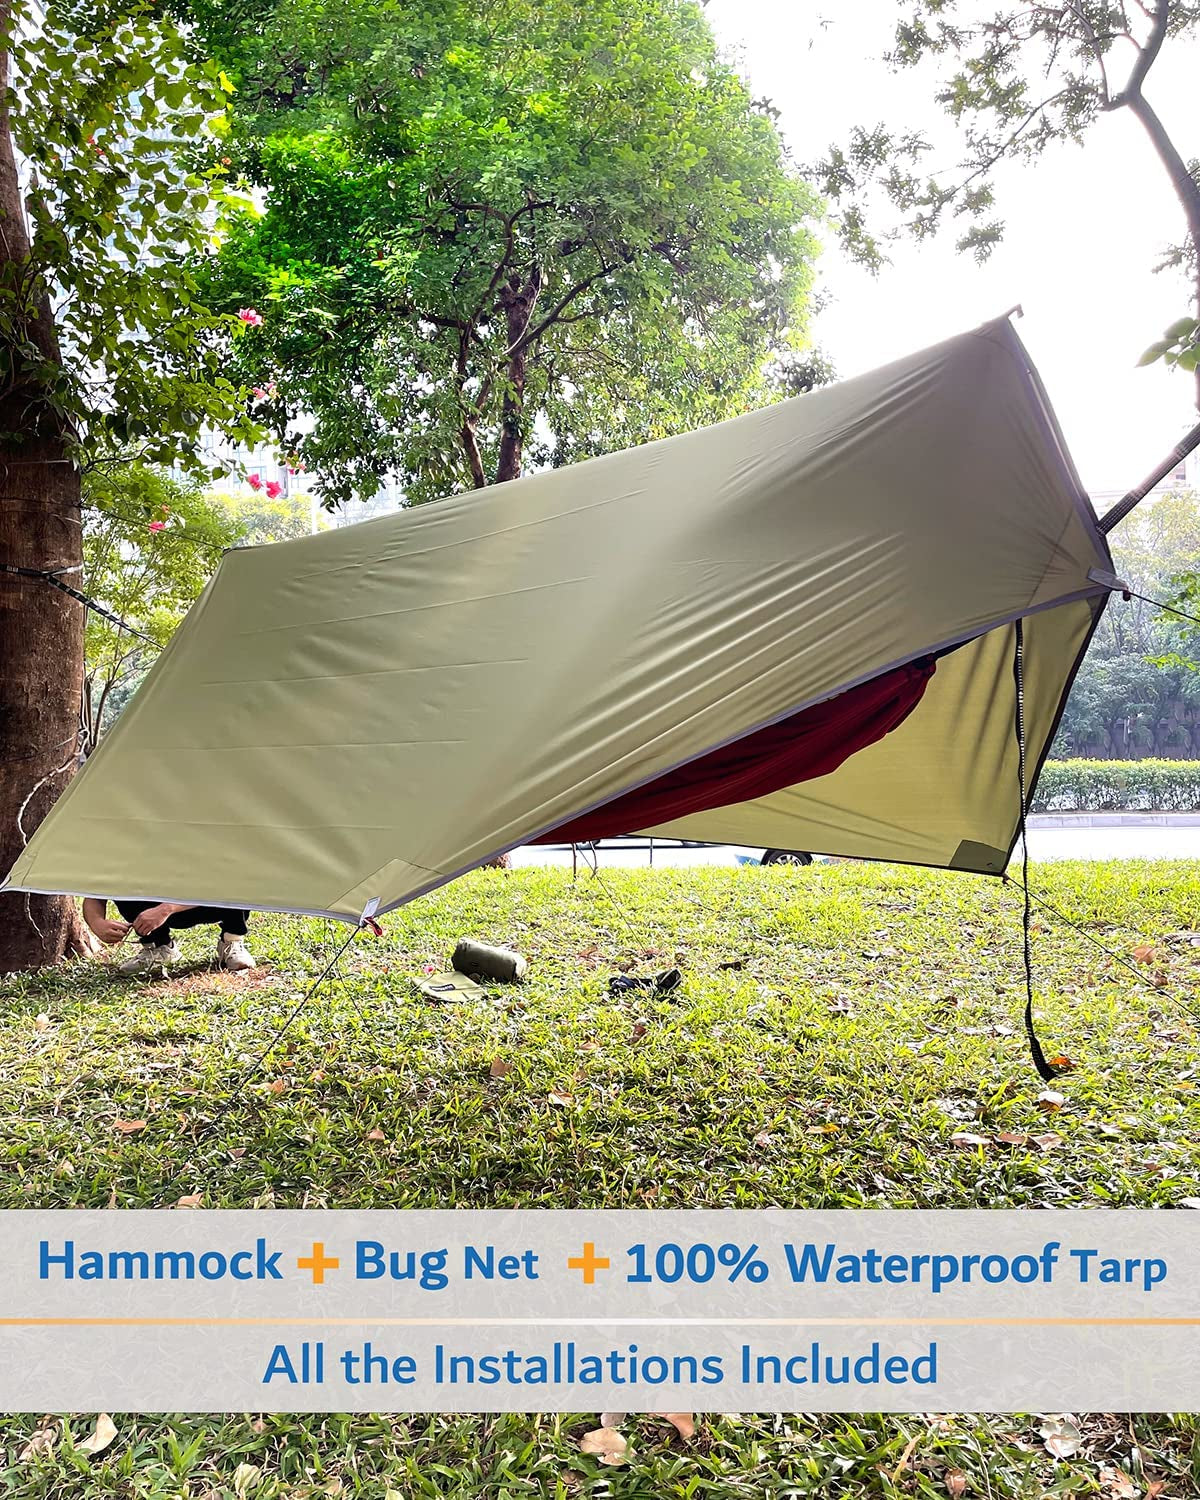 Camping Hammock, Portable Double Hammock with Net, 2 Person Hammock Tent with 2 * 10Ft Straps, Best for Outdoor Hiking Survival Travel